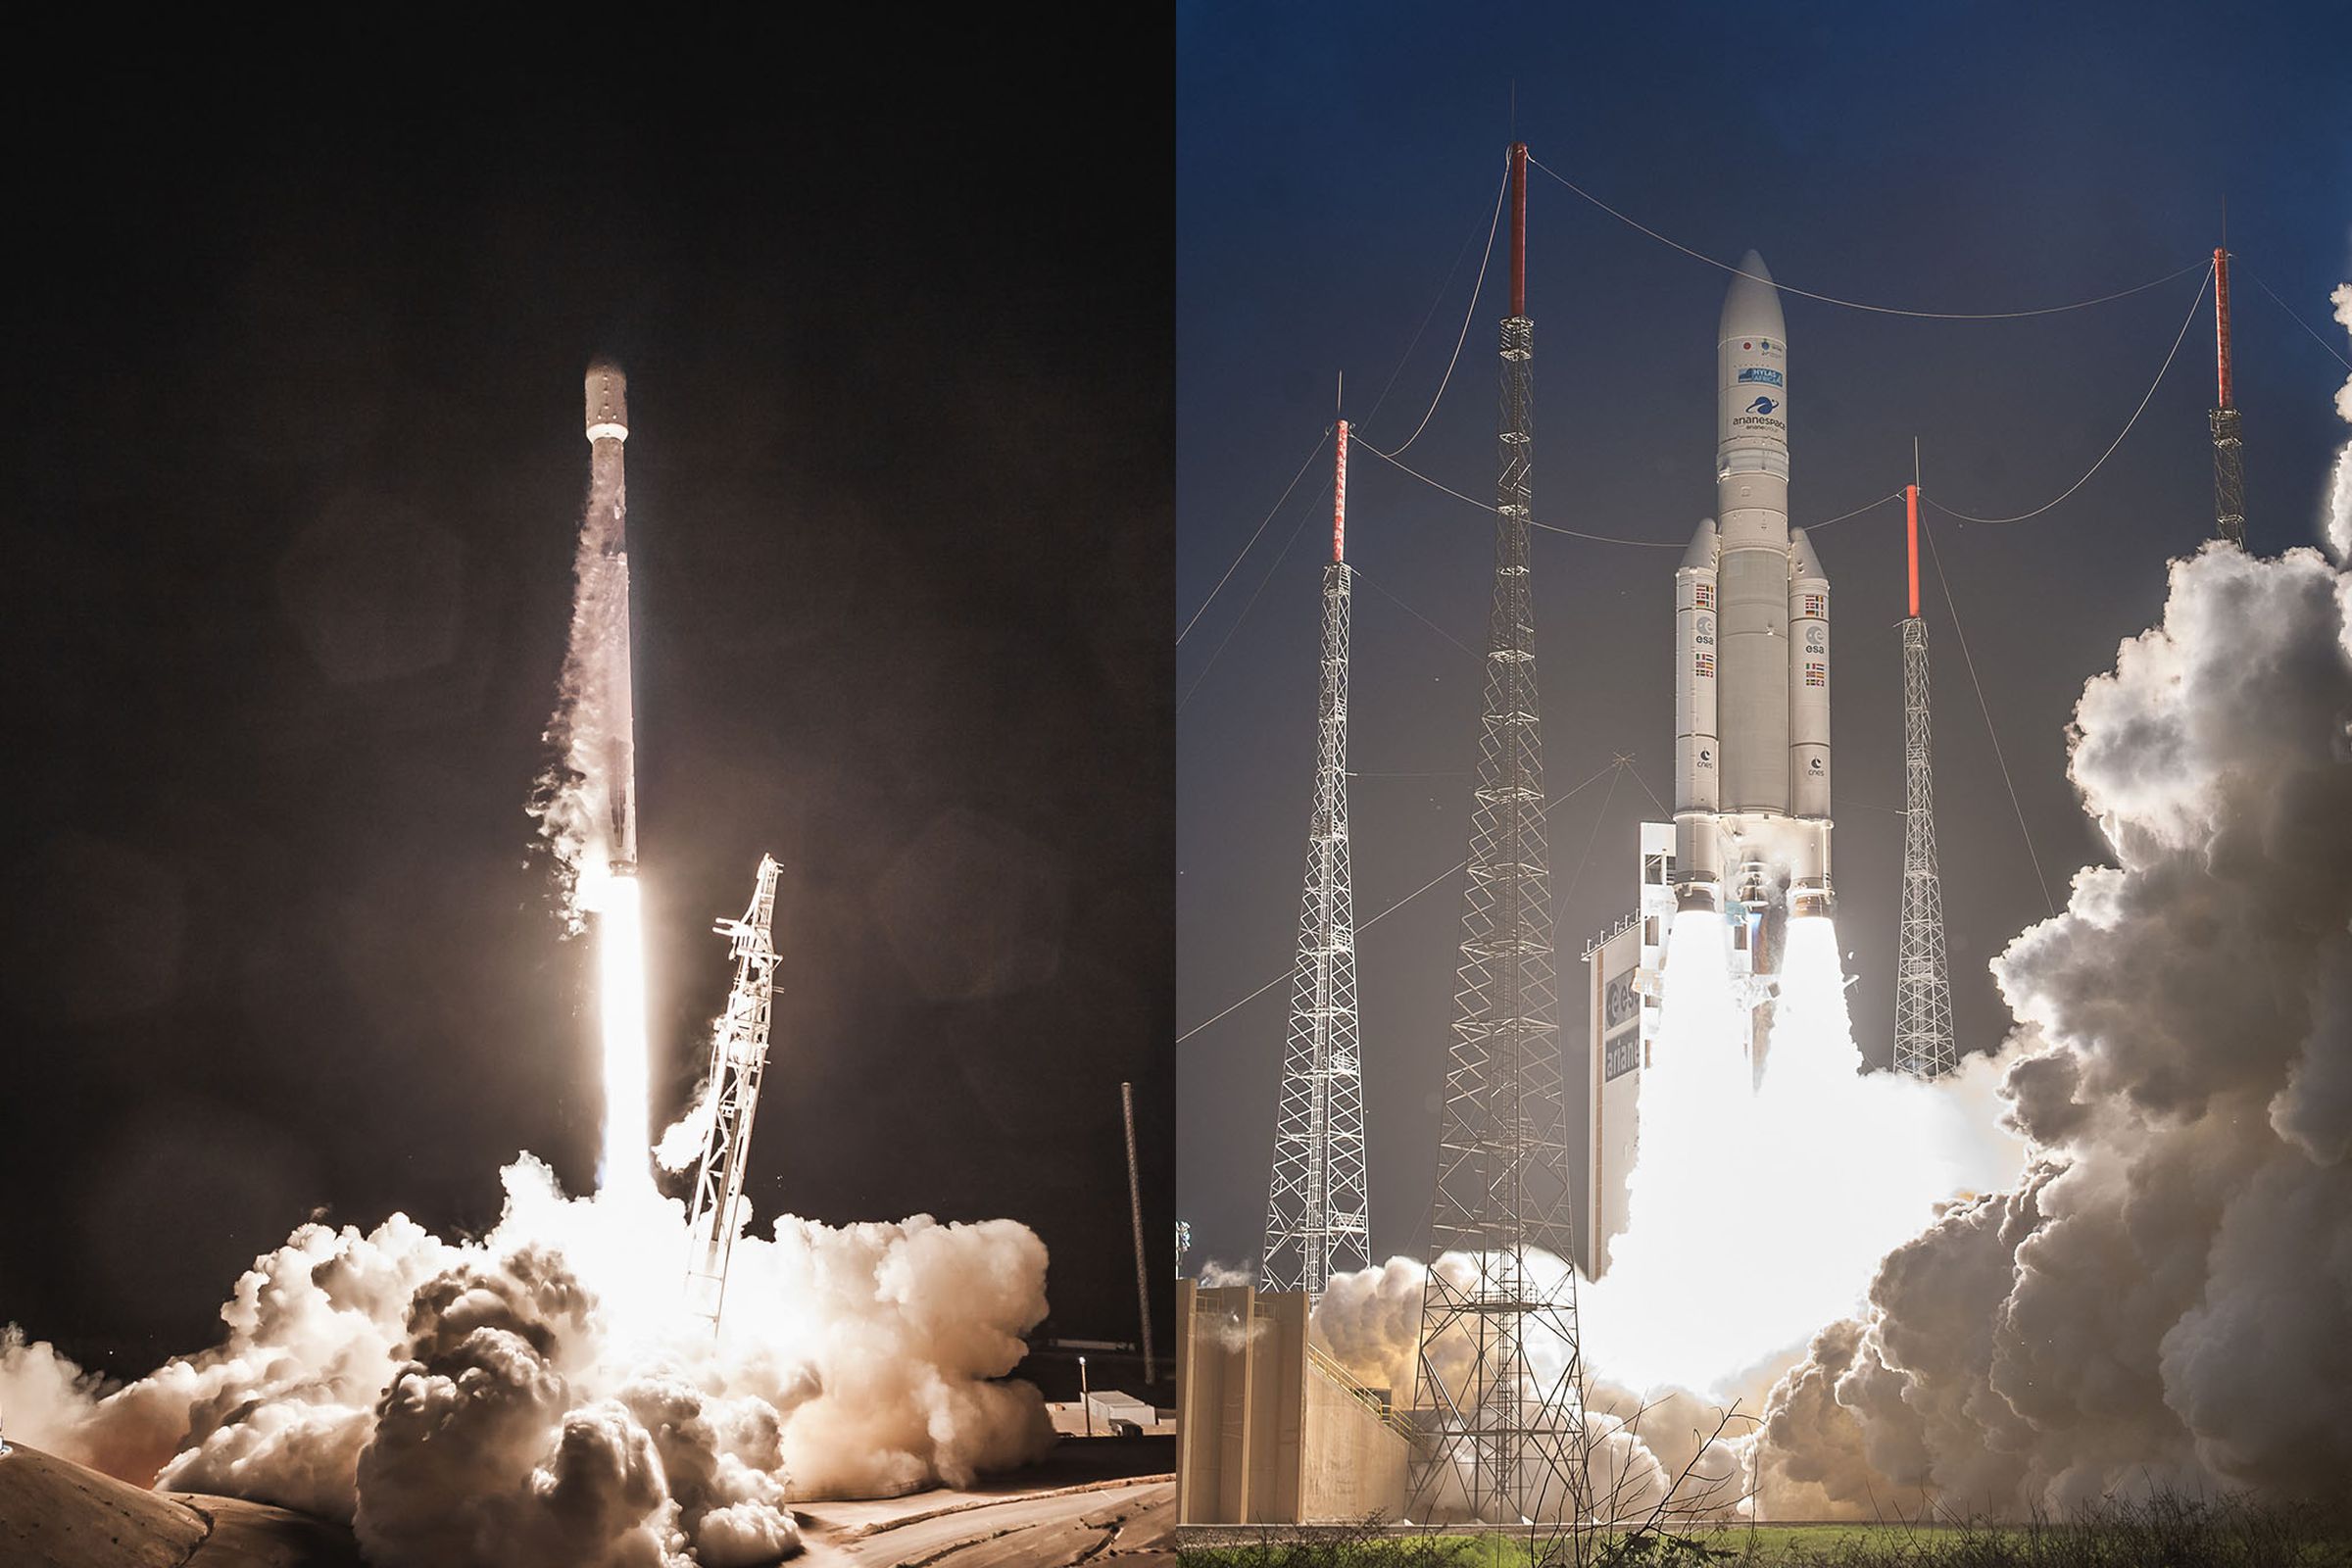 SpaceX’s Falcon 9 rocket (L) taking off from Vandenberg Air Force Base, and Arianespace’s Ariane 5 (R) taking off from French Guiana.